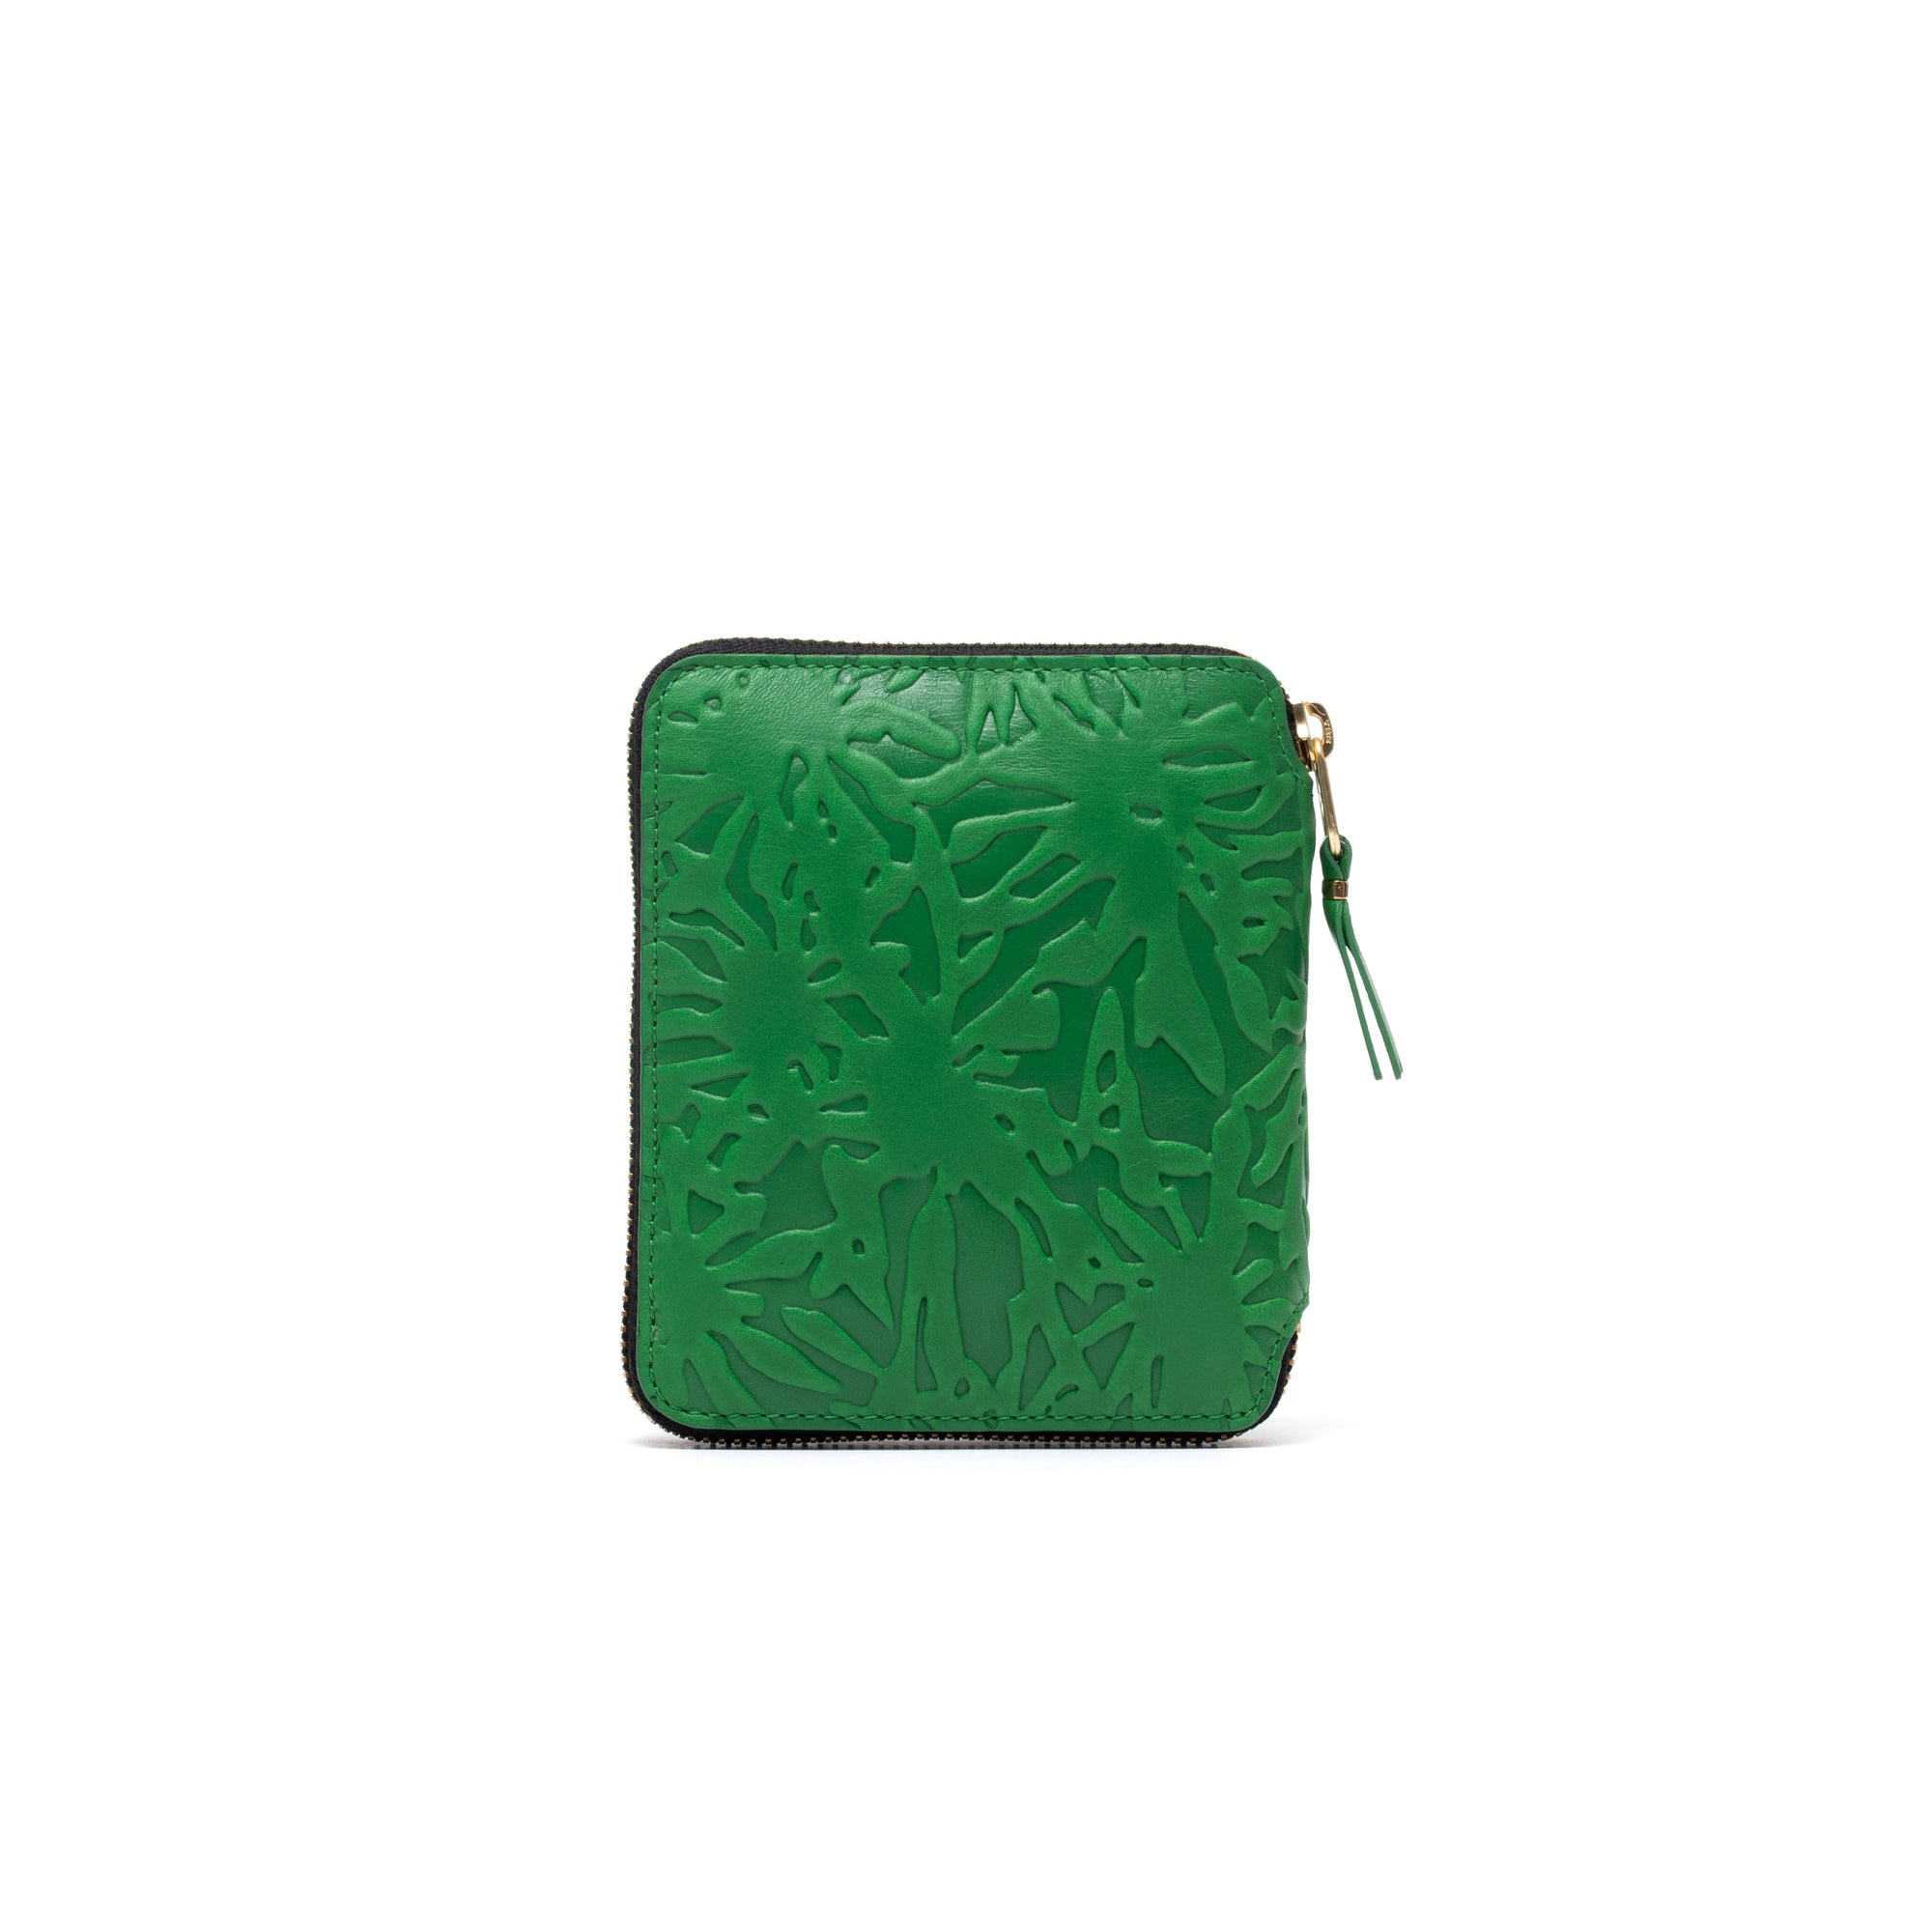 CDG WALLET - Embossed Forest - (SA2100EF Green) view 2